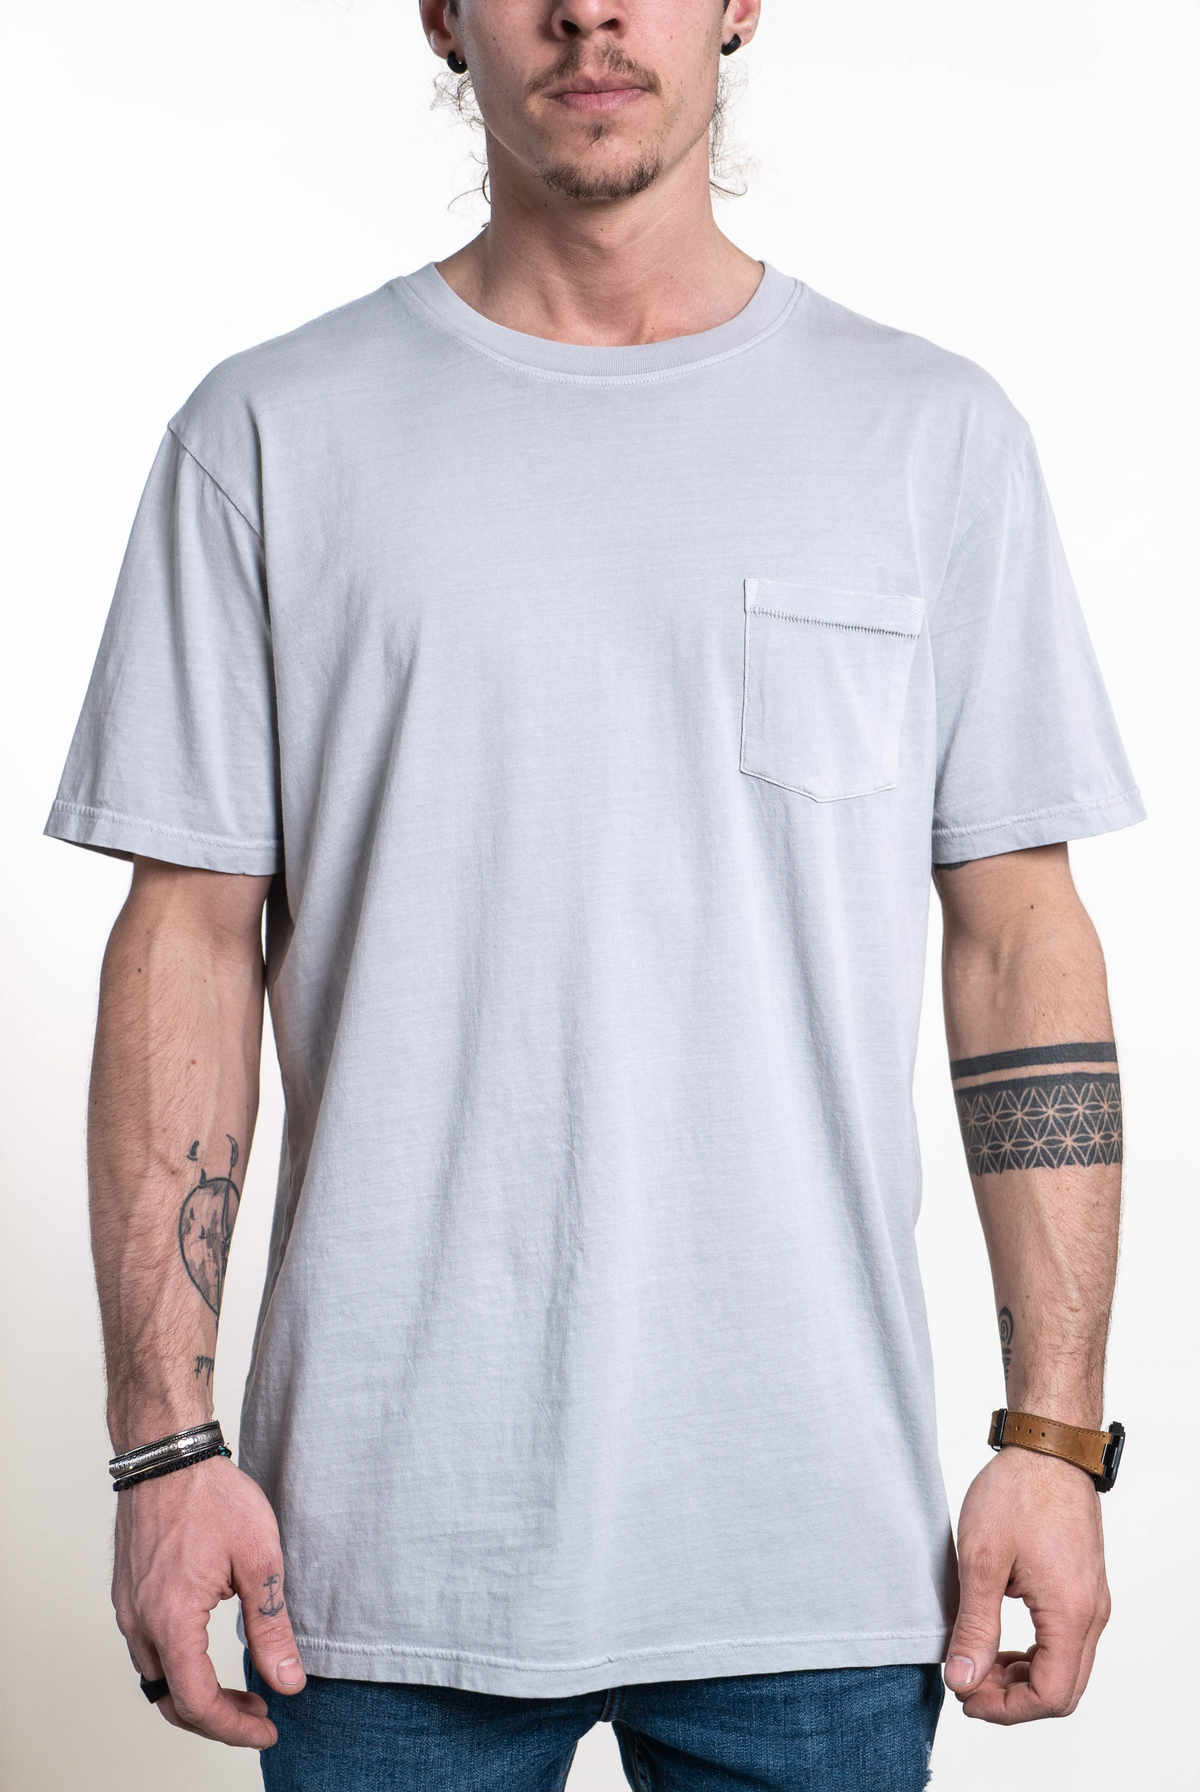 STSSC14 - Pigment Dyed Pocket Tee